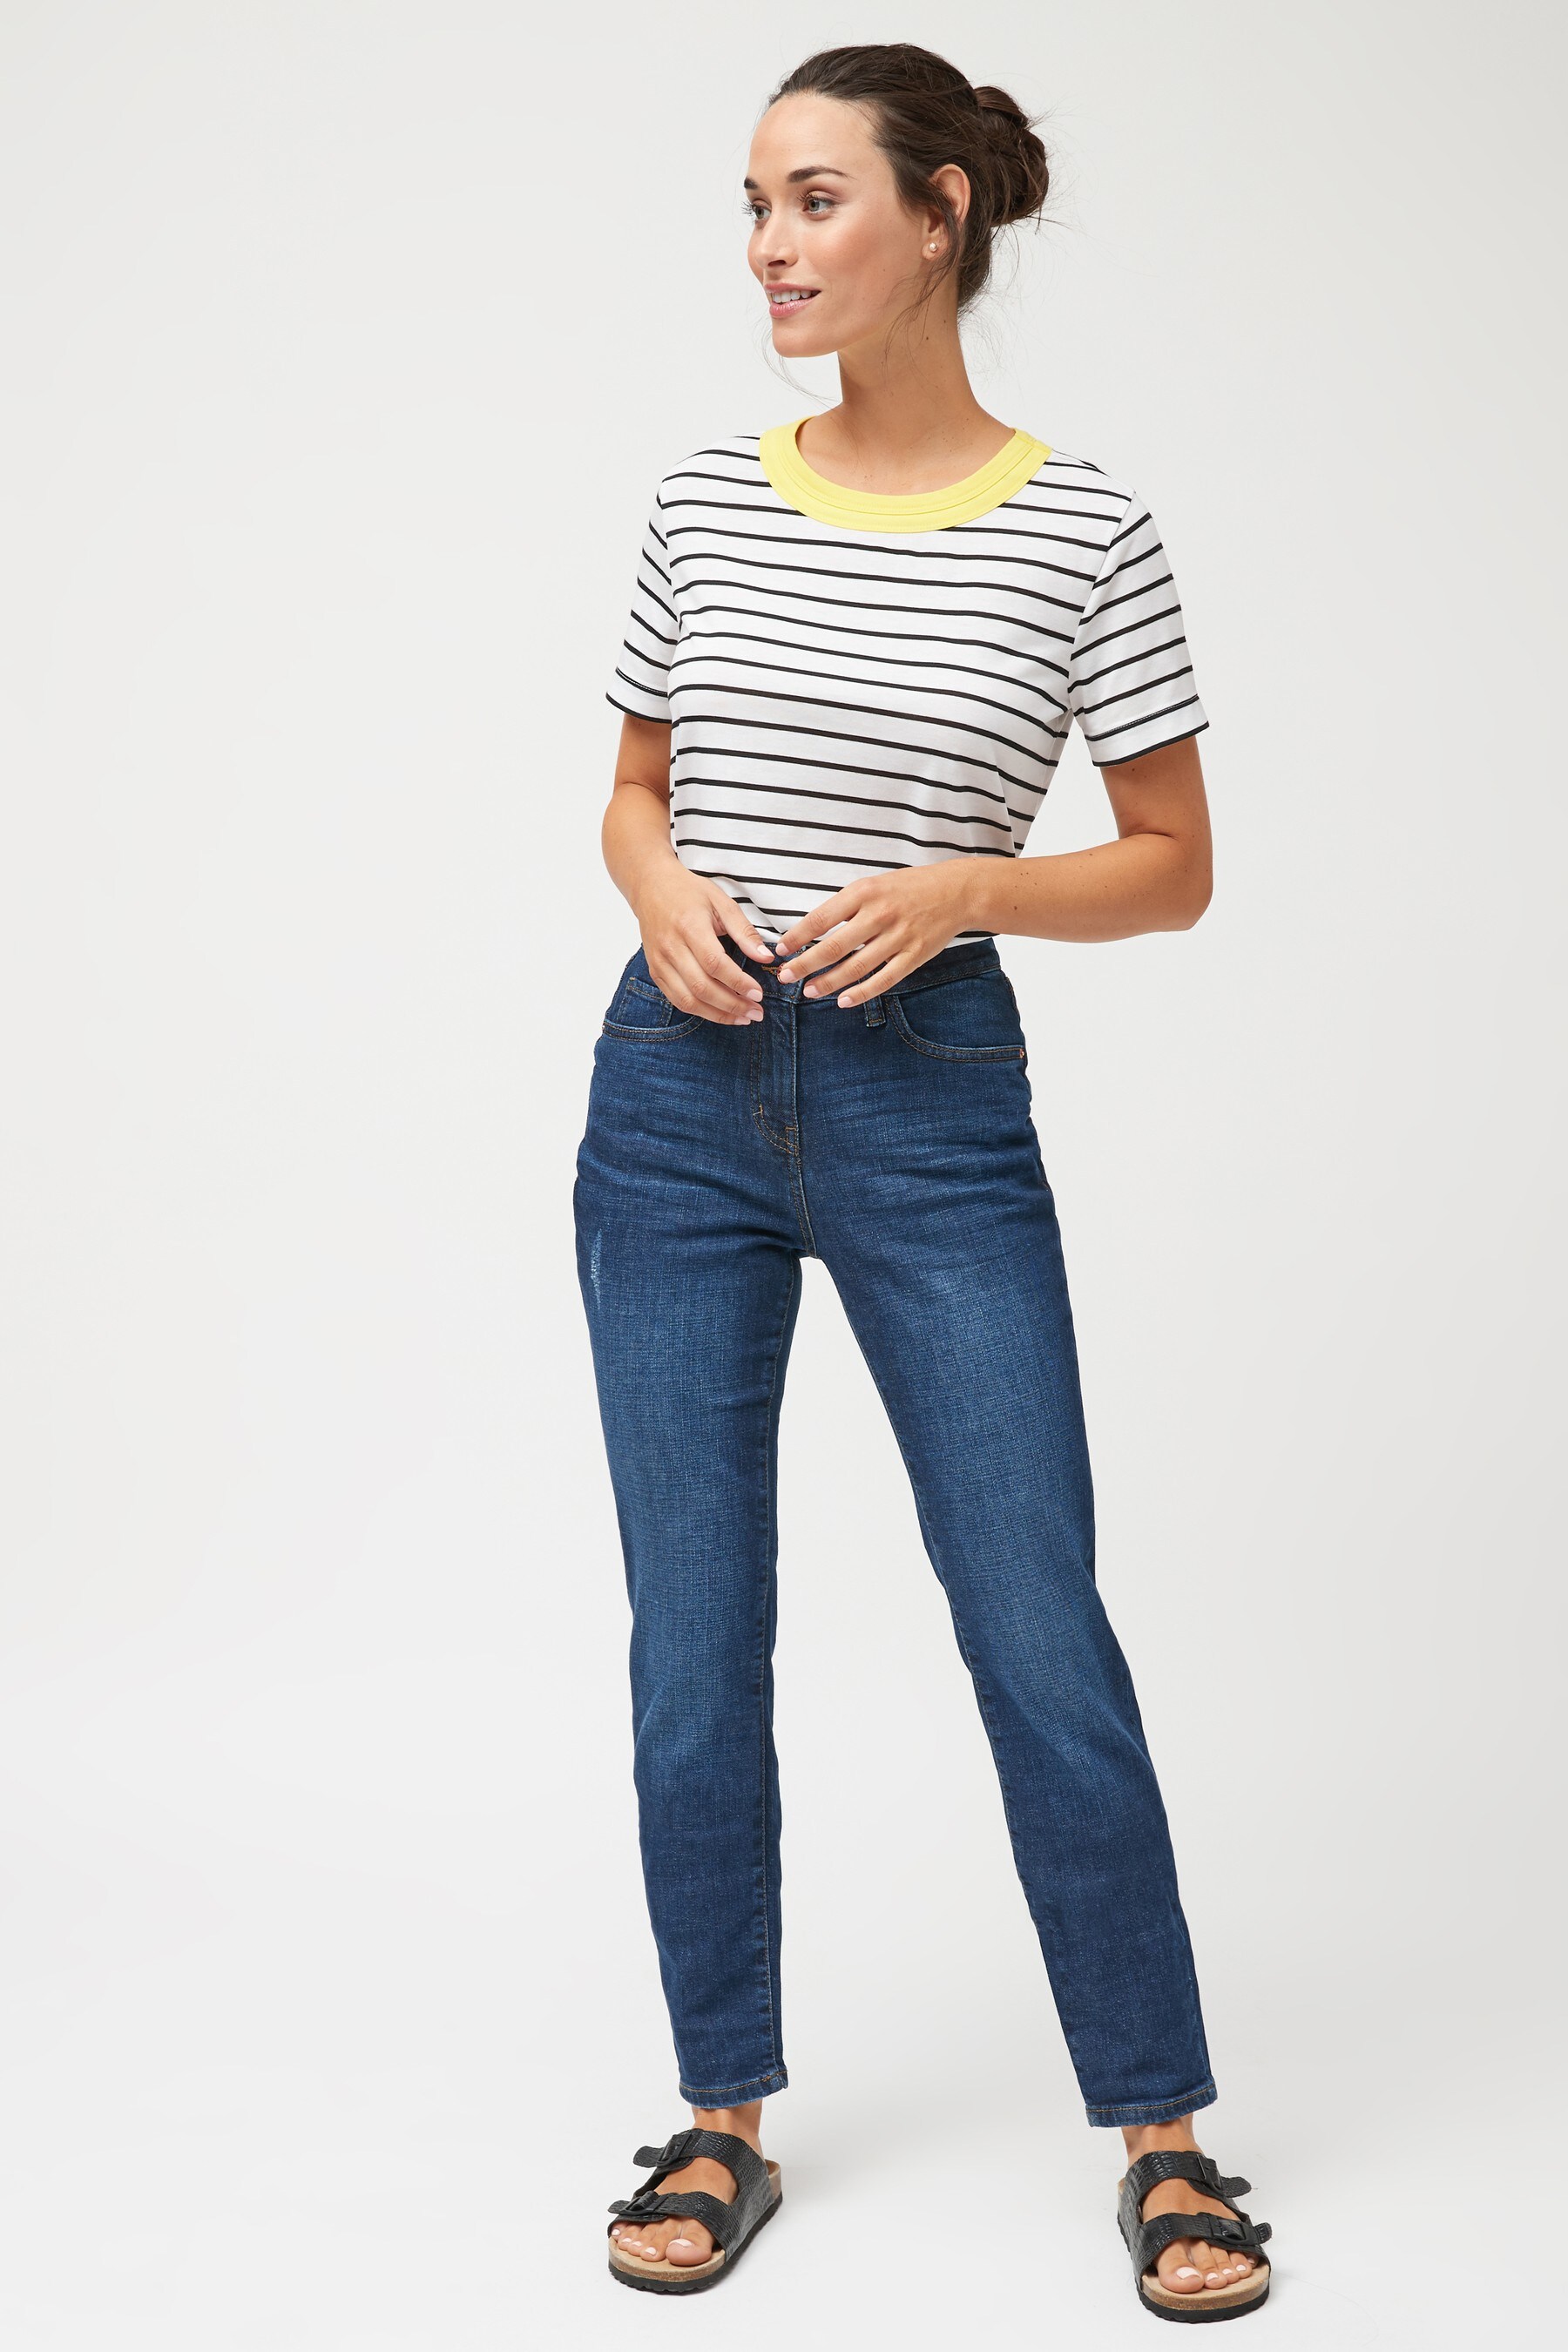 Buy Dark Wash Relaxed Skinny Jeans from the Next UK online shop